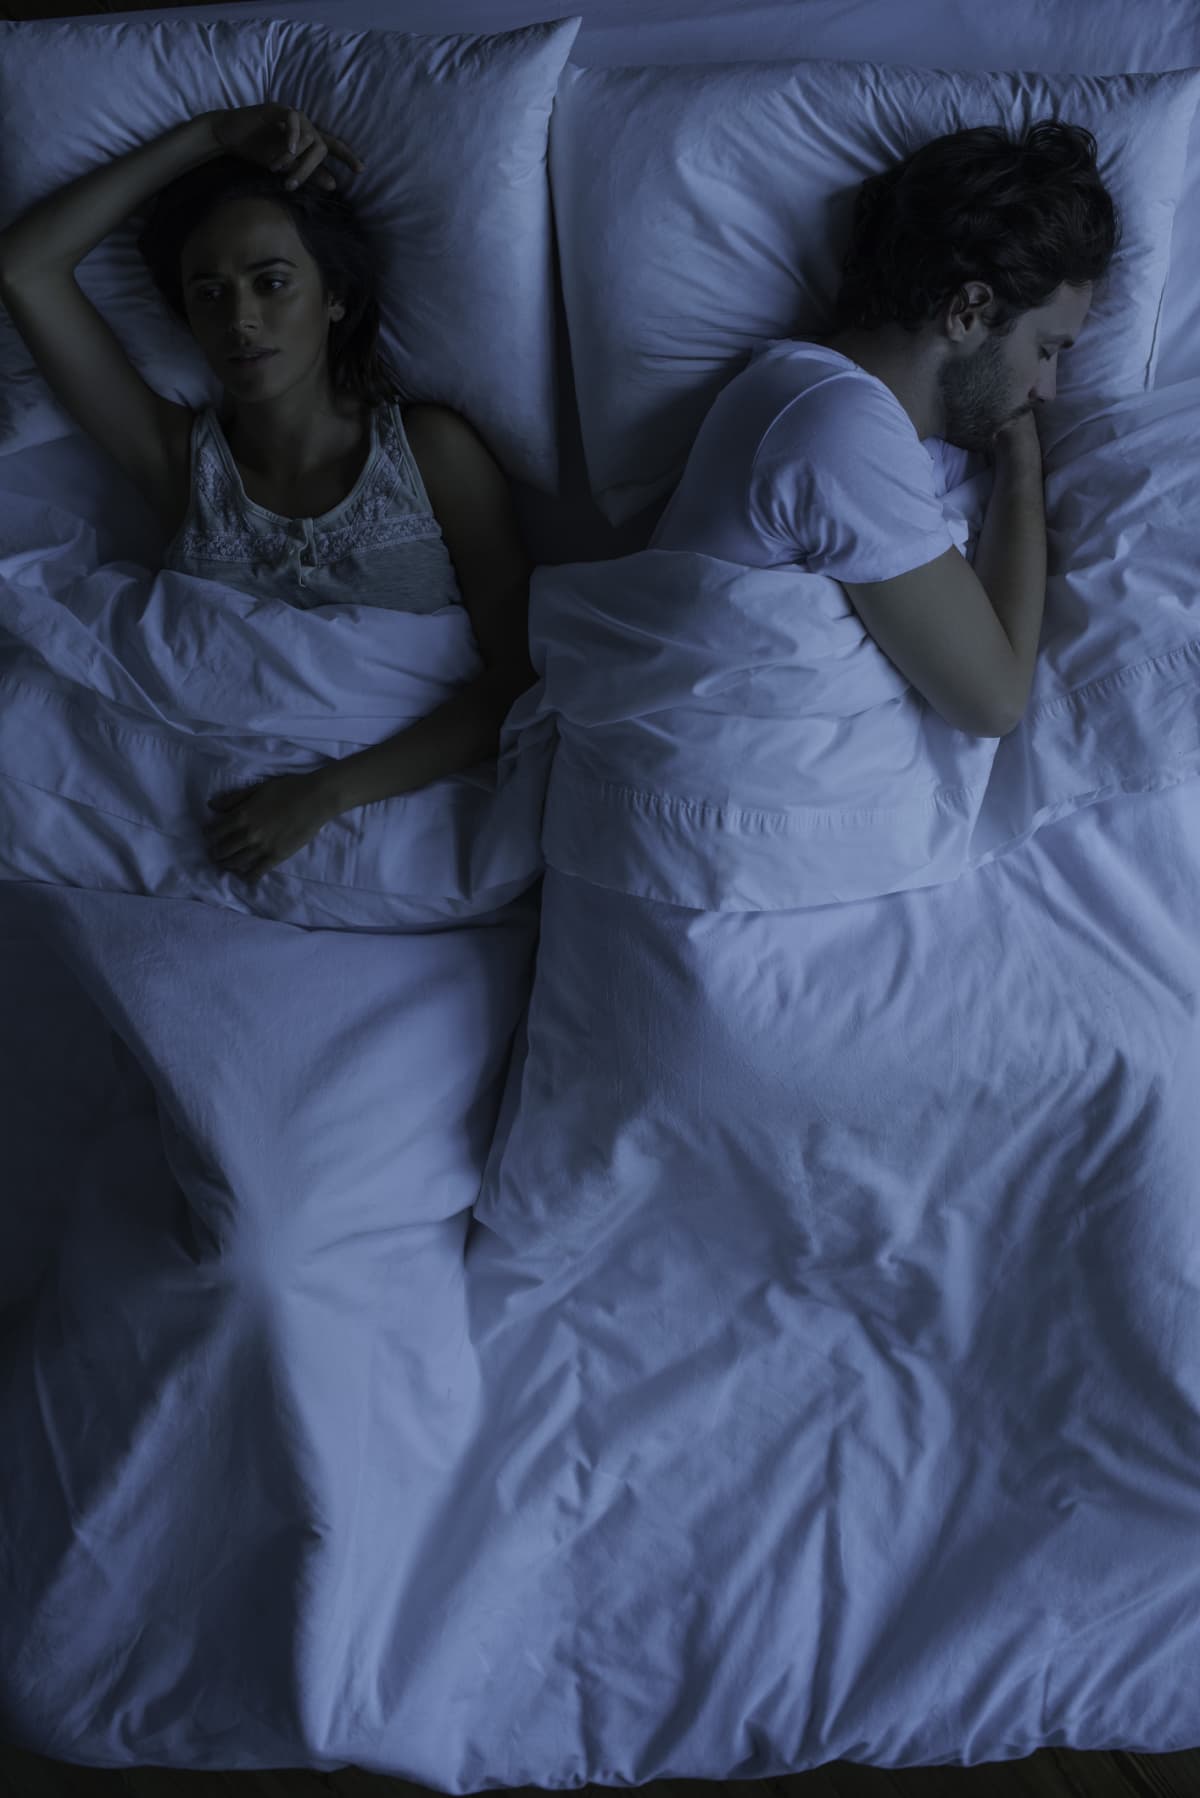 A woman lies awake in bed in the middle of the night worried that her partner who is sleeping soundly has grown distant